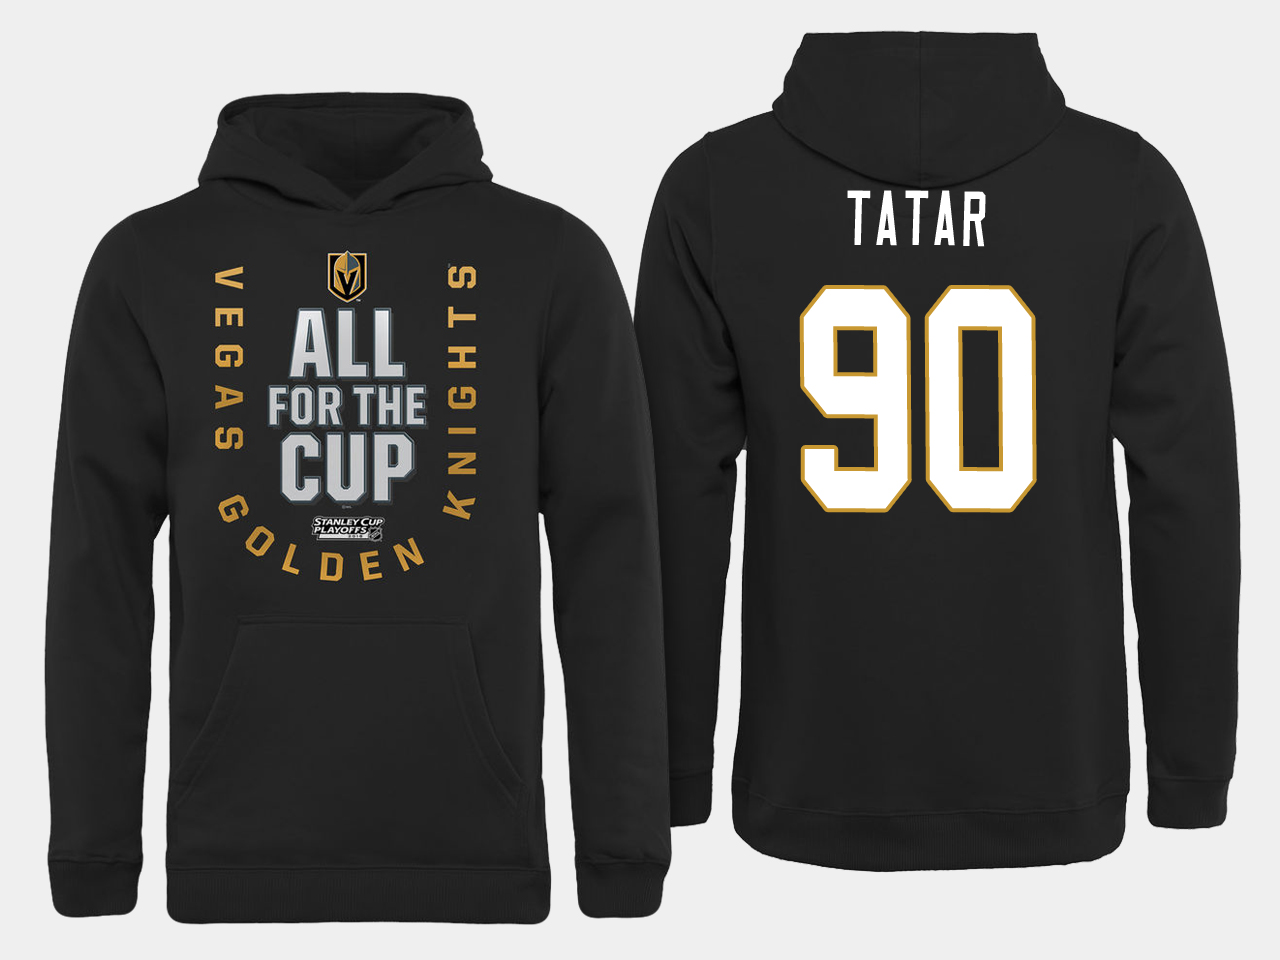 Men NHL Vegas Golden Knights #90 Tatar All for the Cup hoodie->customized nhl jersey->Custom Jersey